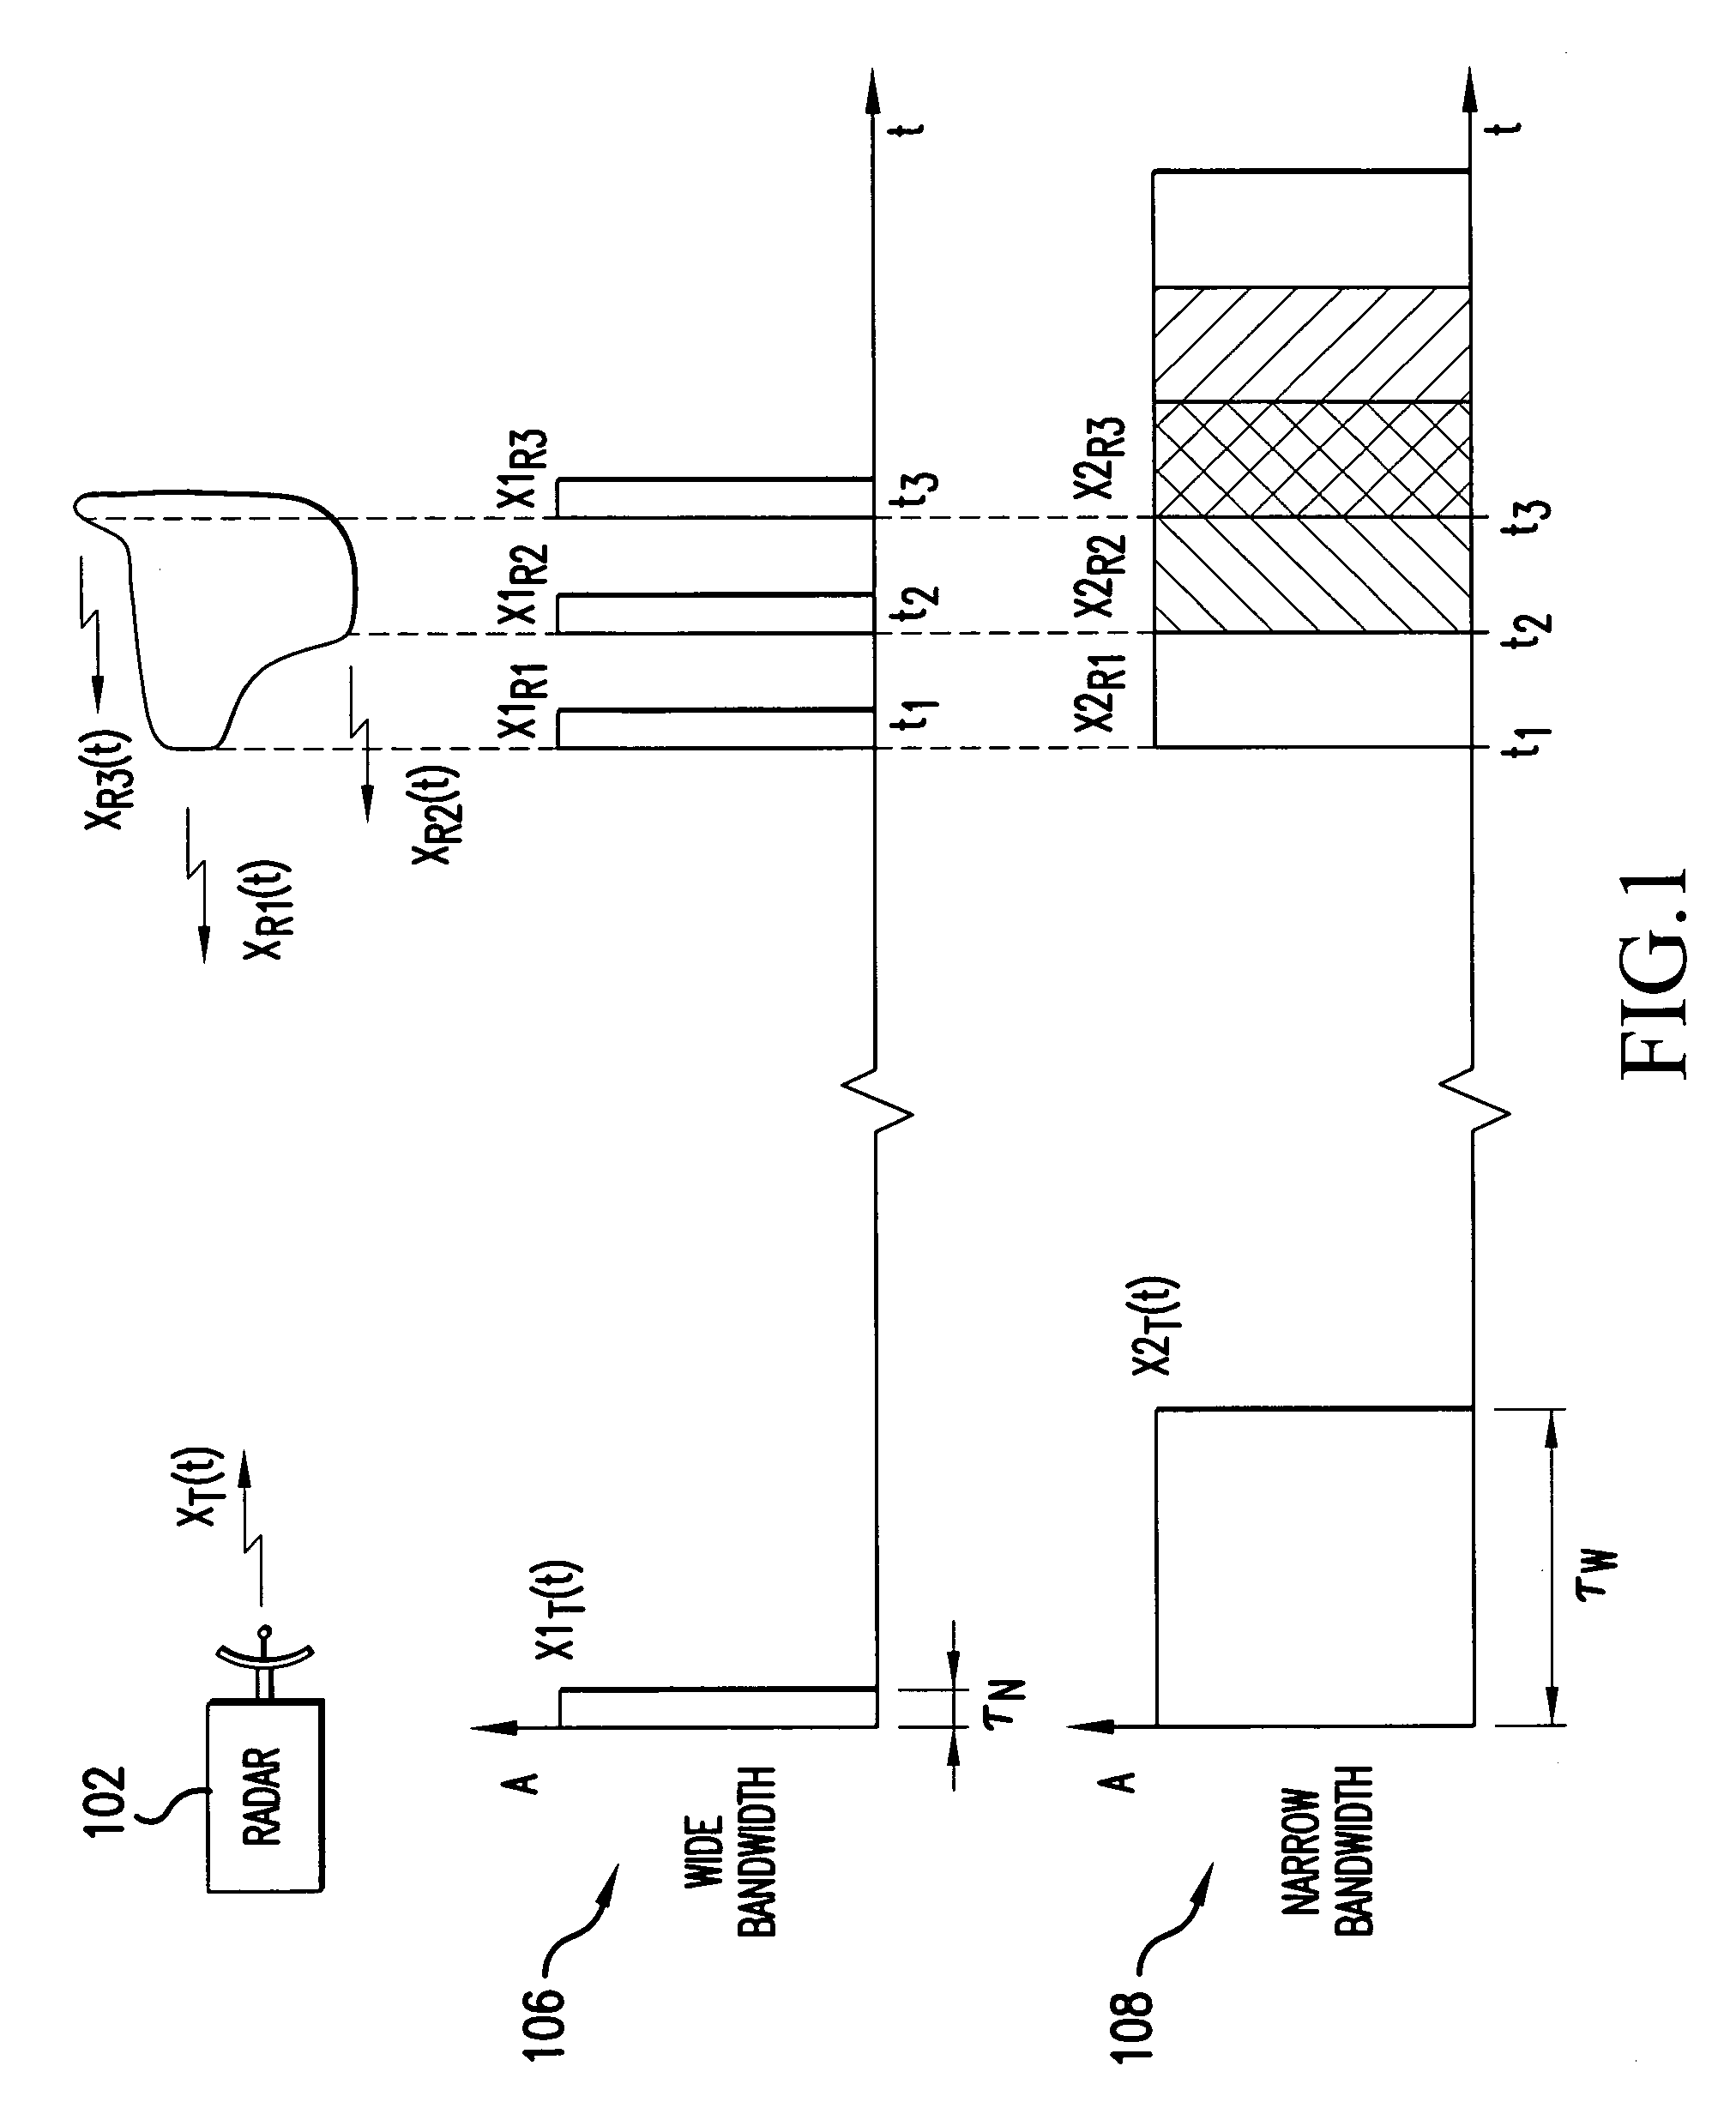 Methods and apparatus for target radial extent determination using deconvolution